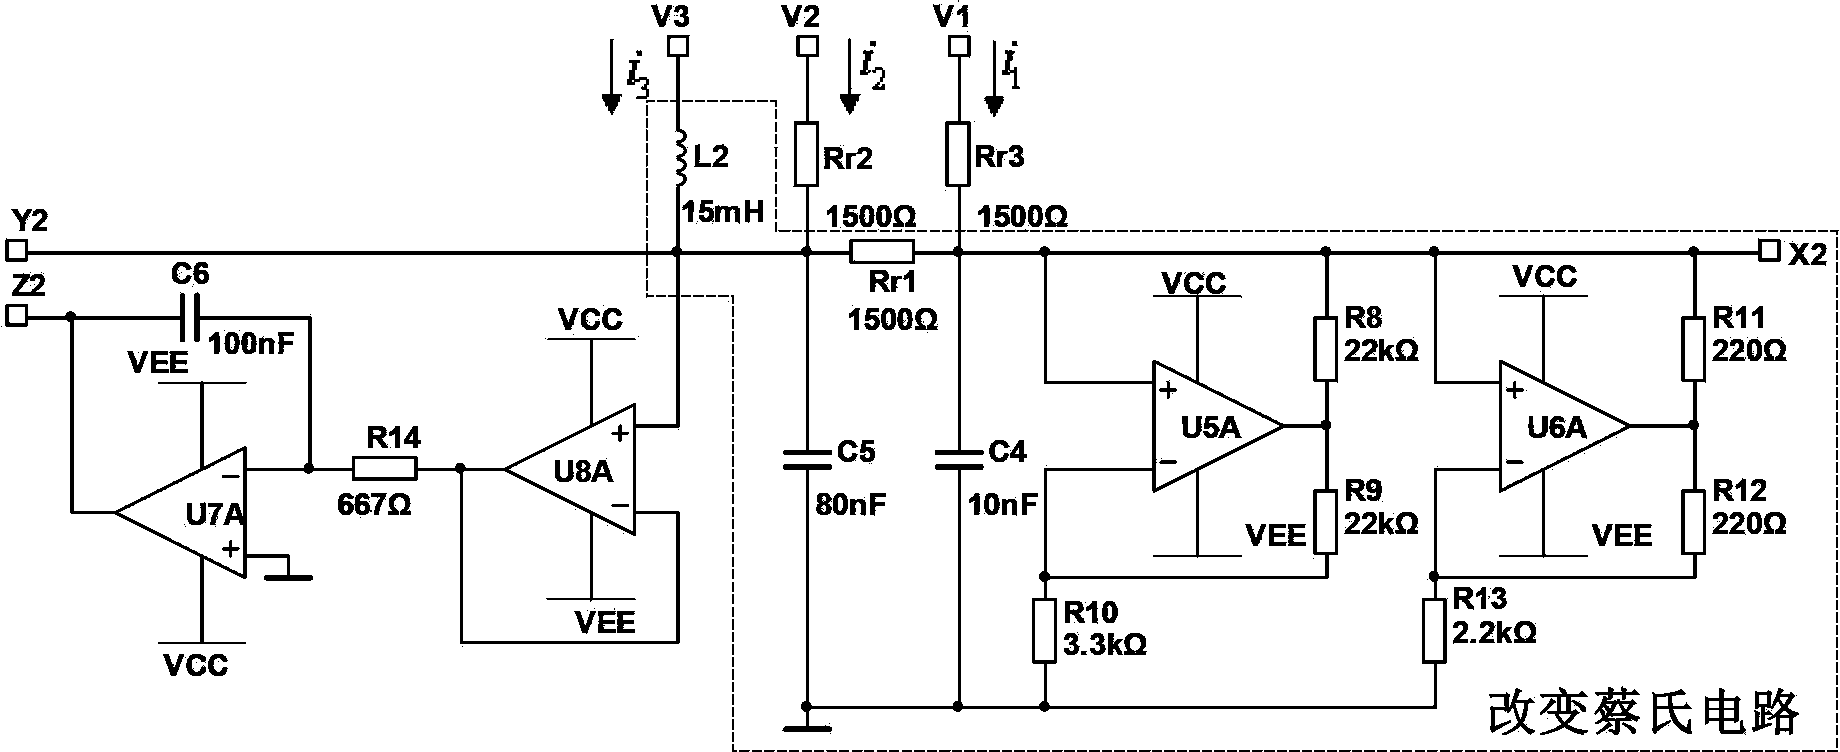 Chua's chaos system synchronization control circuit which is designed based on feedback current